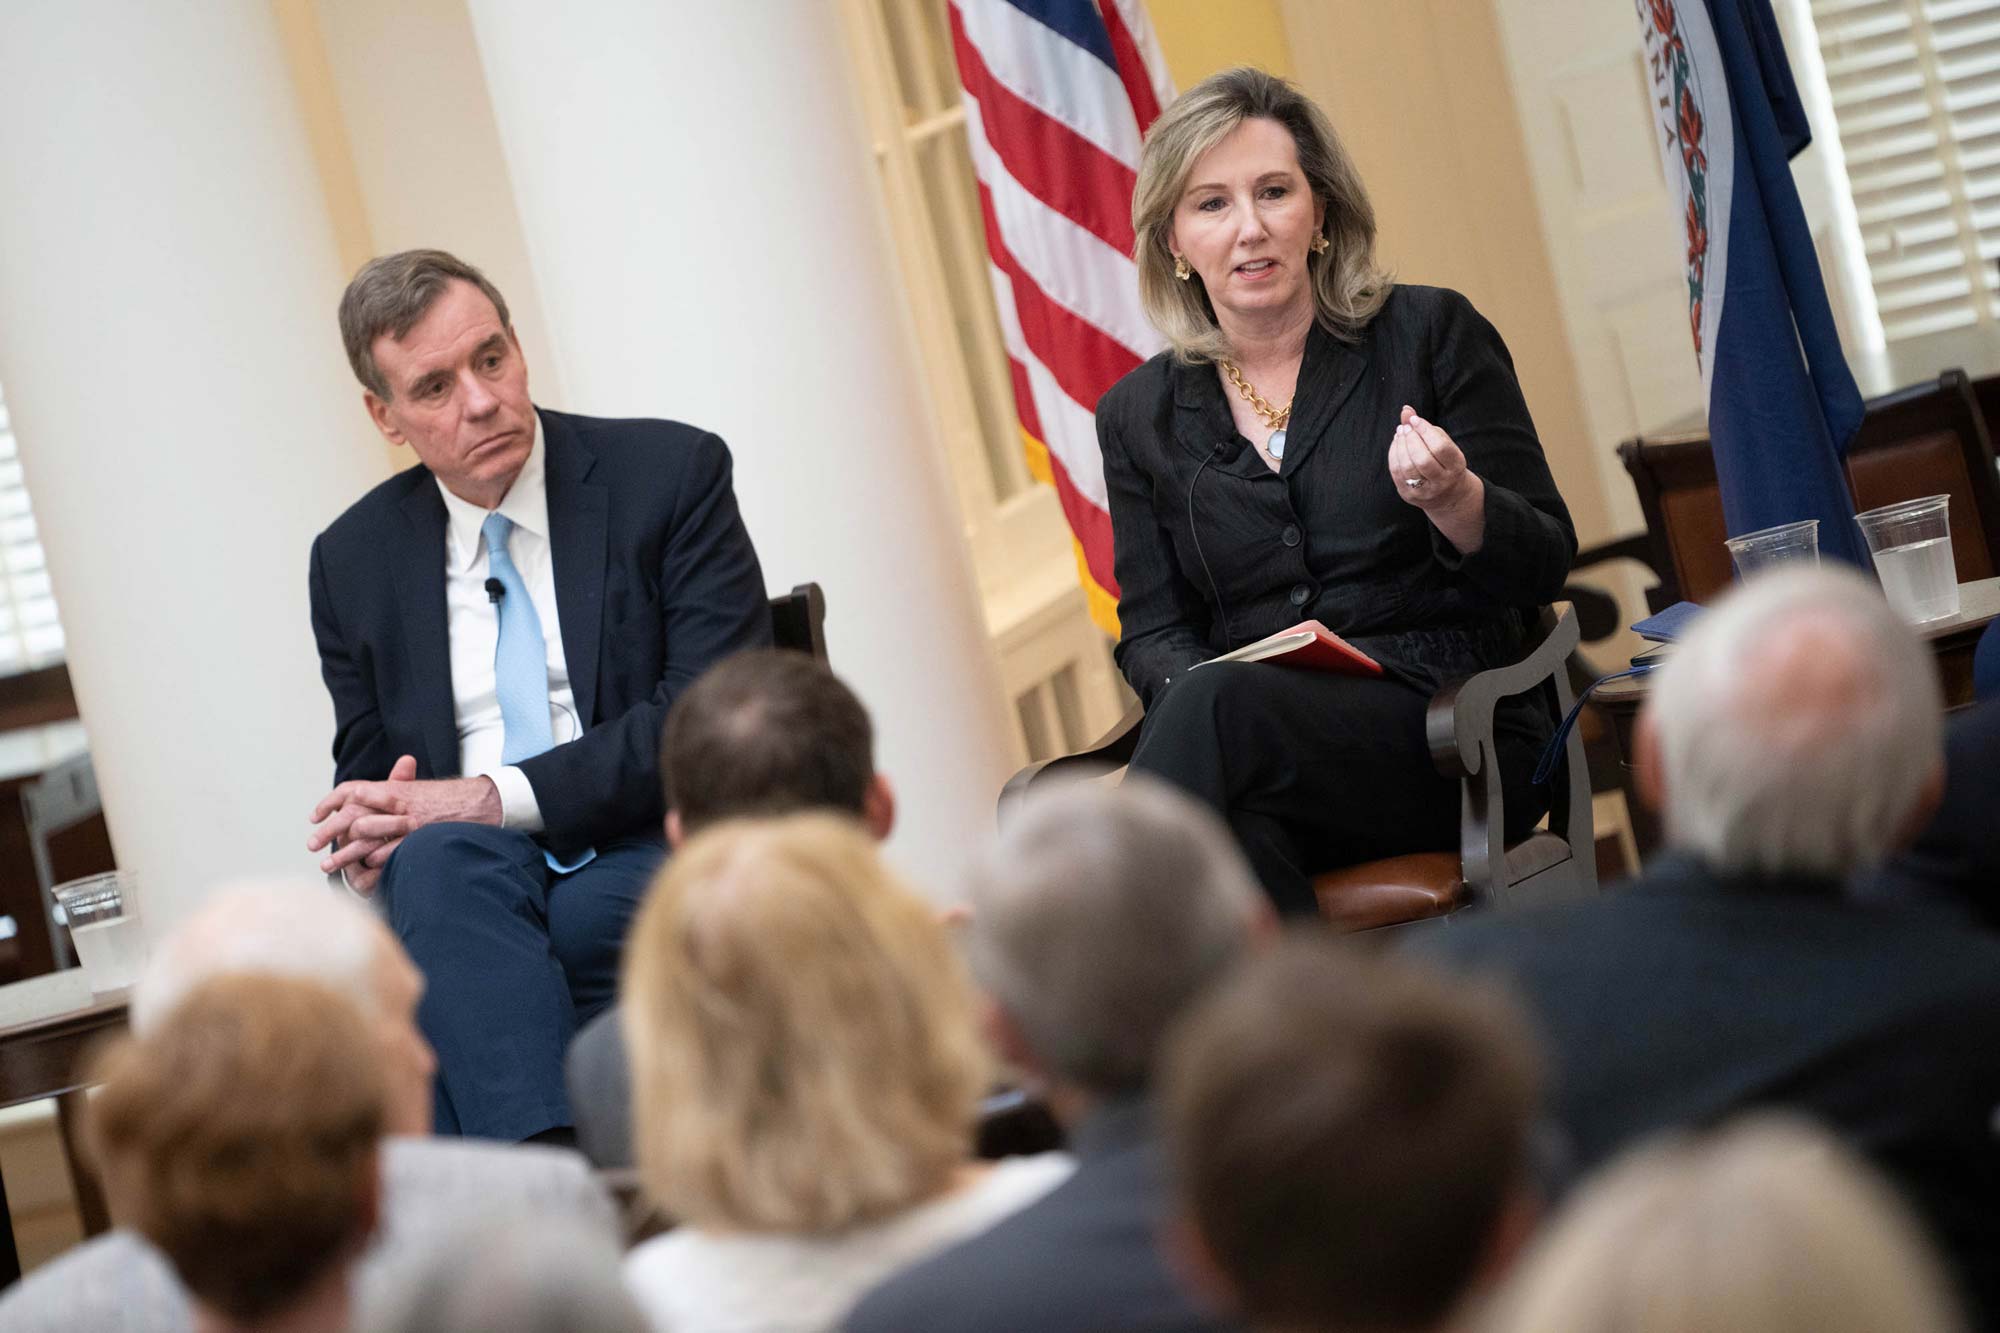 Barbara Comstock, seated next to Mark Warner, speaks to the audience.